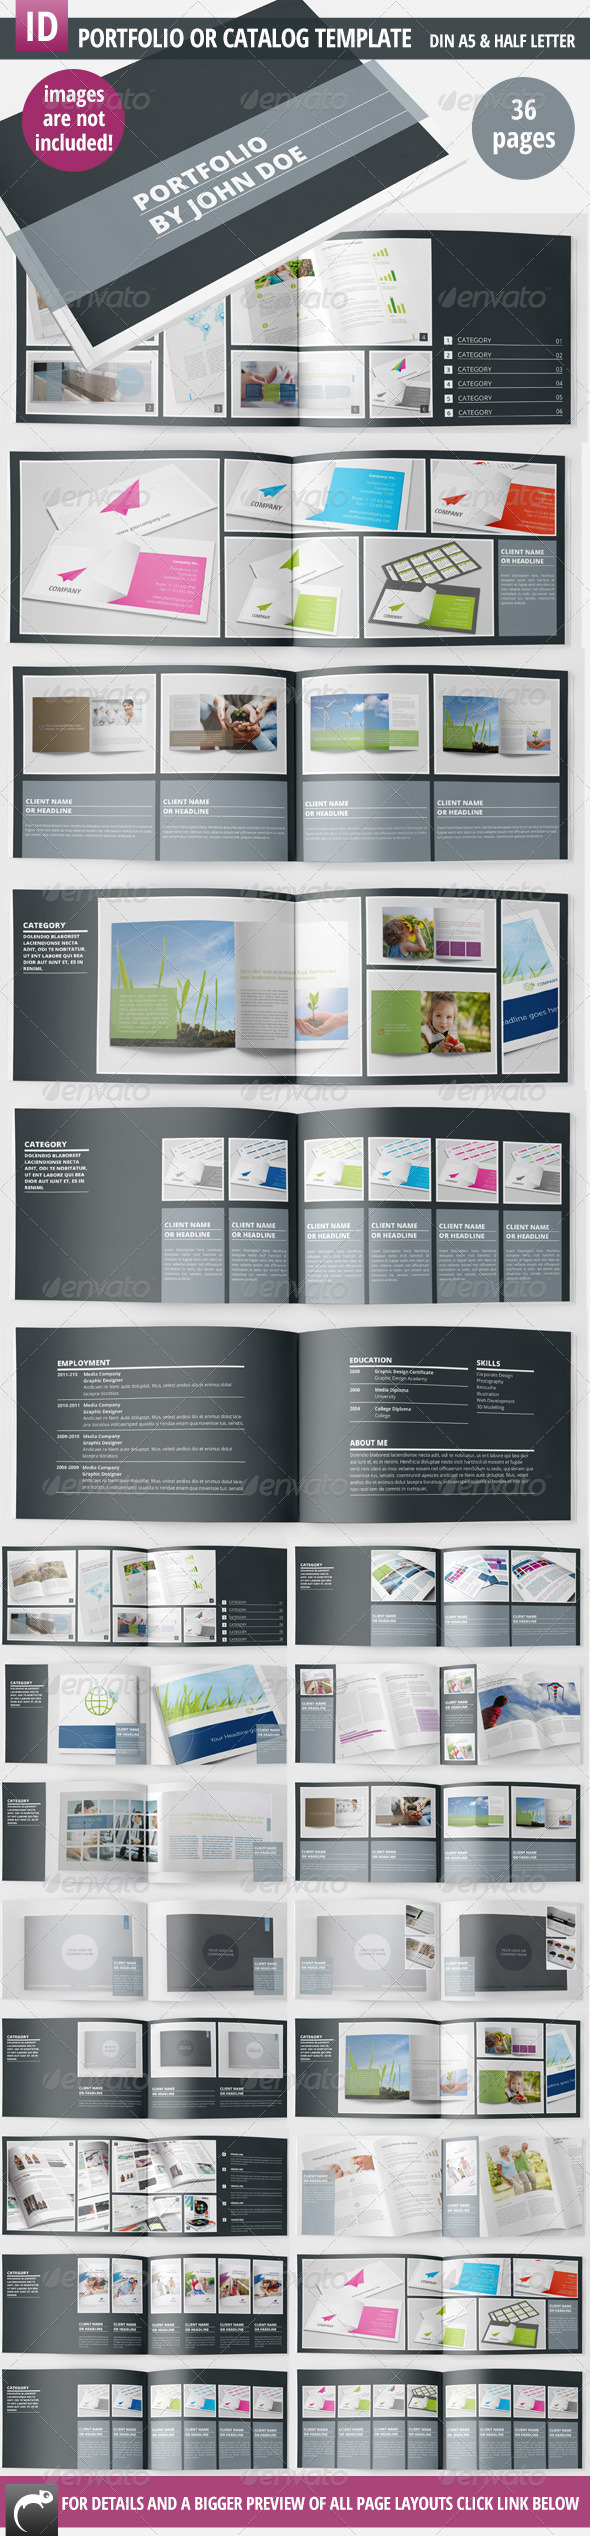 Portfolio Booklet or Catalog Template - 36 Pages